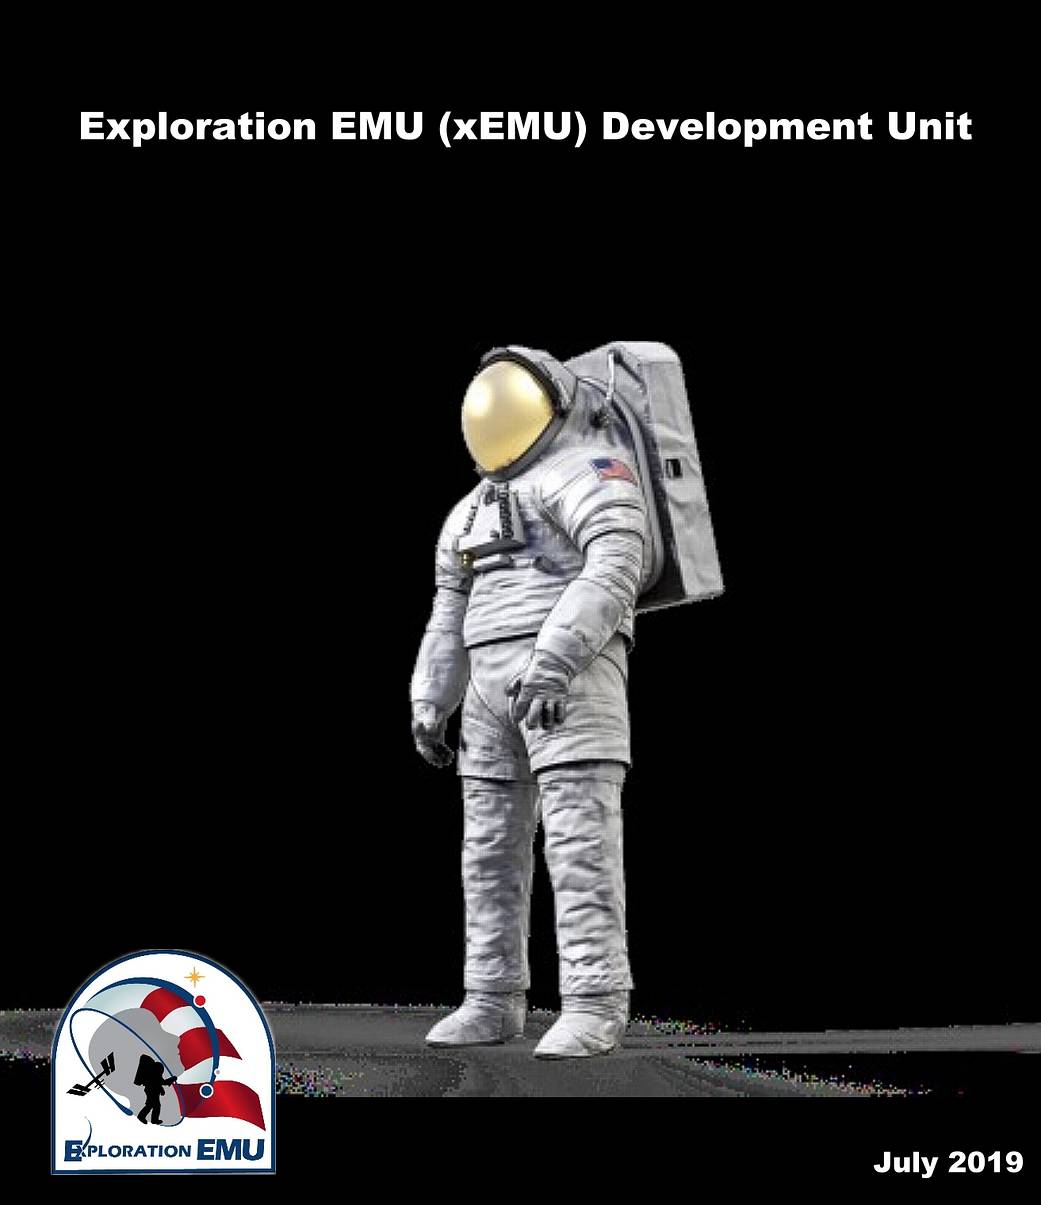 Nasa SpaceX launch: Evolution of the spacesuit